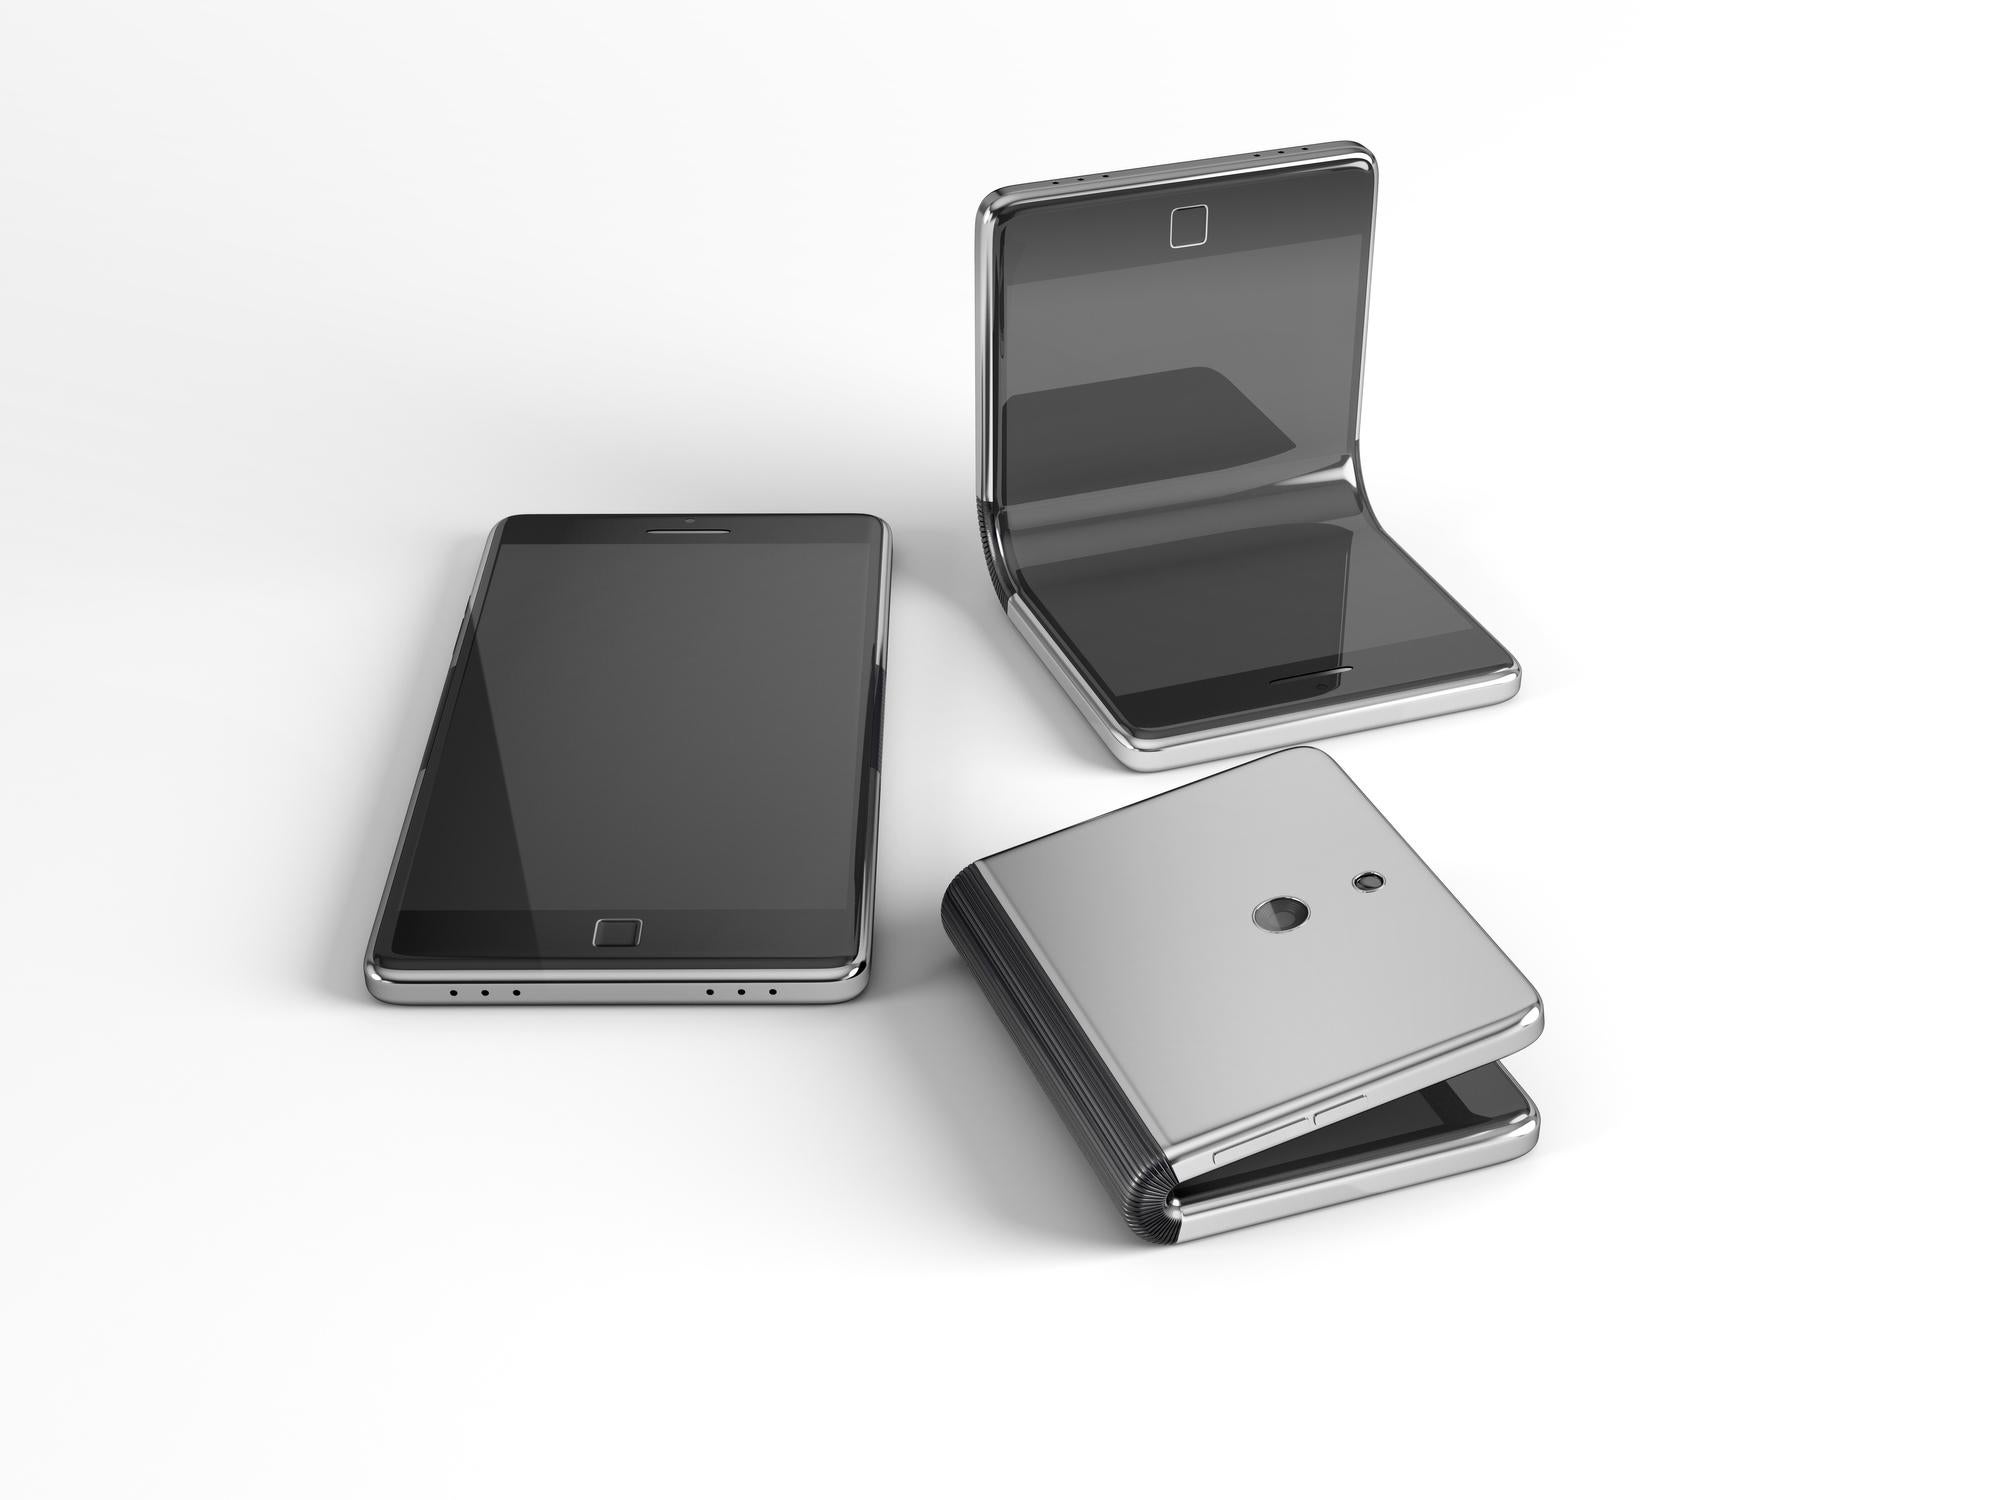 A concept for a foldable smartphone, which could be similar to the Samsung 'Galaxy F' (Getty Images/iStockphoto)